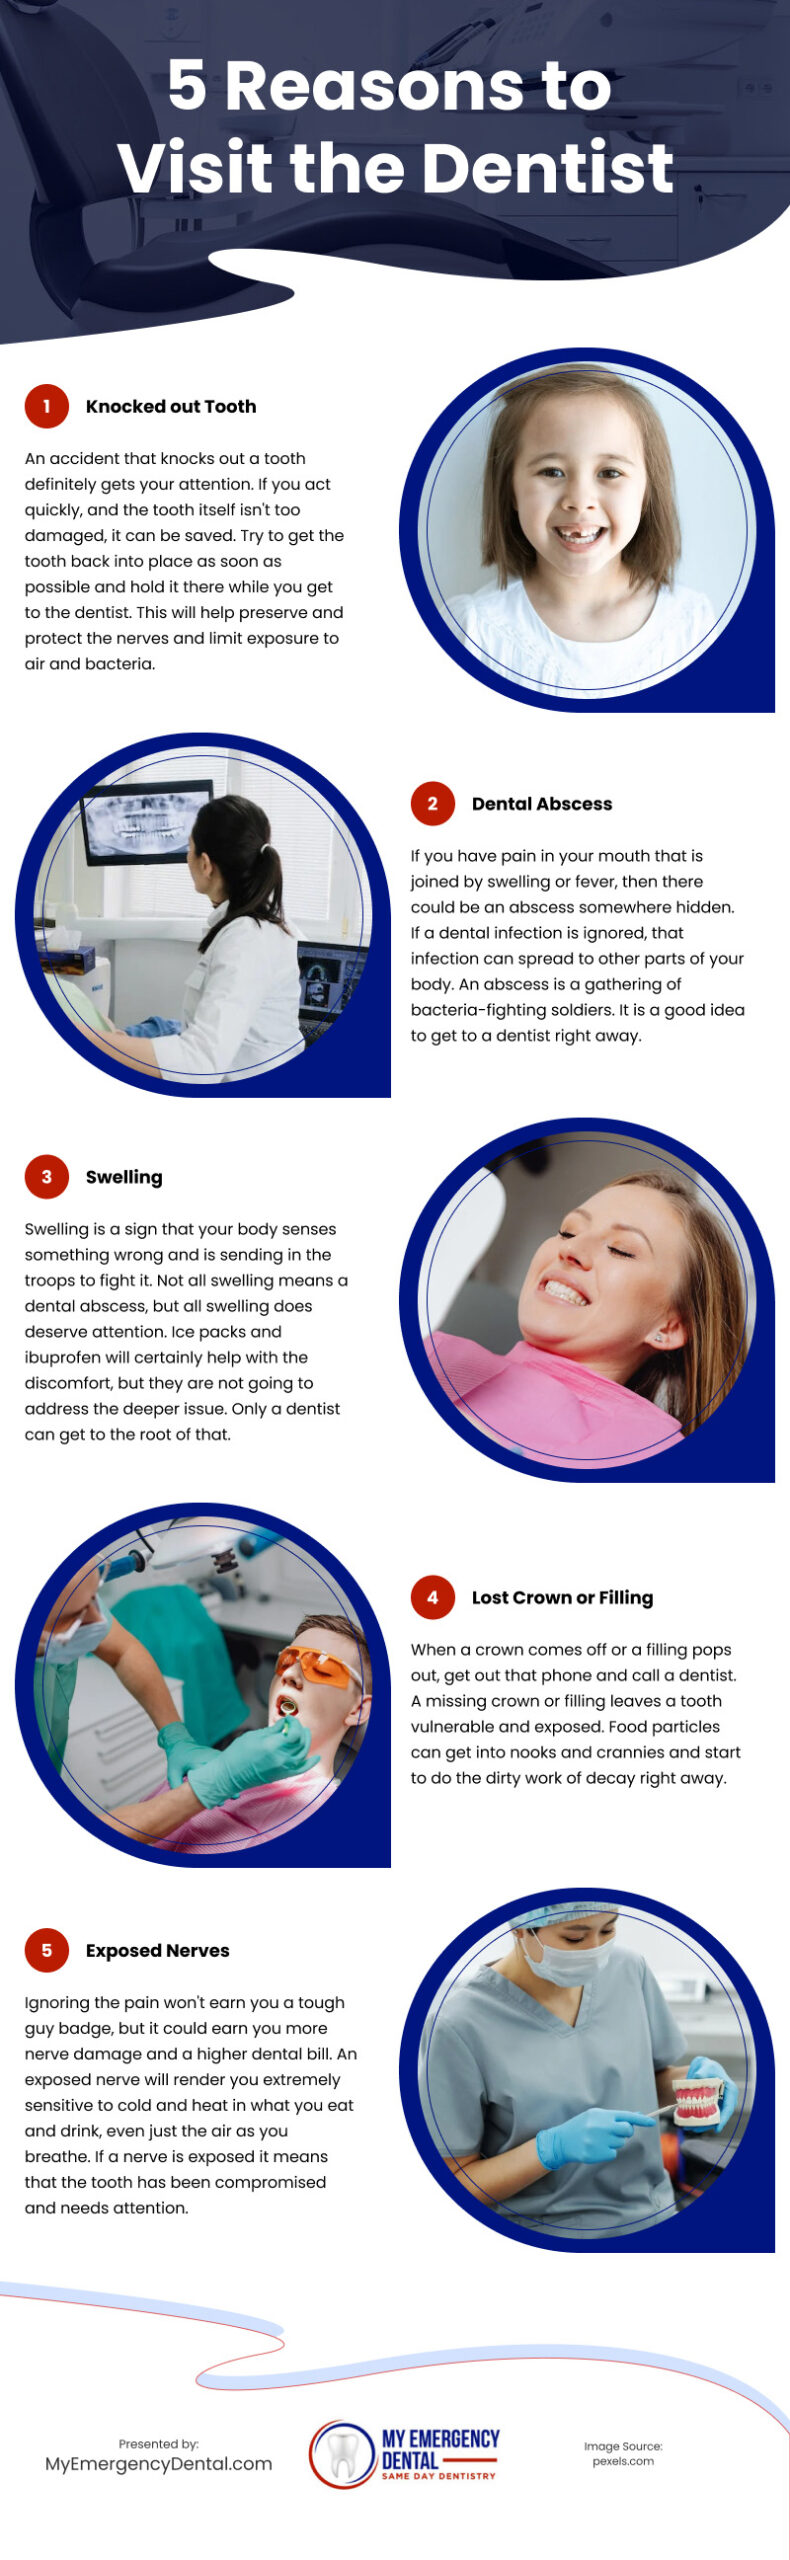 5 Reasons to Visit the Dentist Infographic